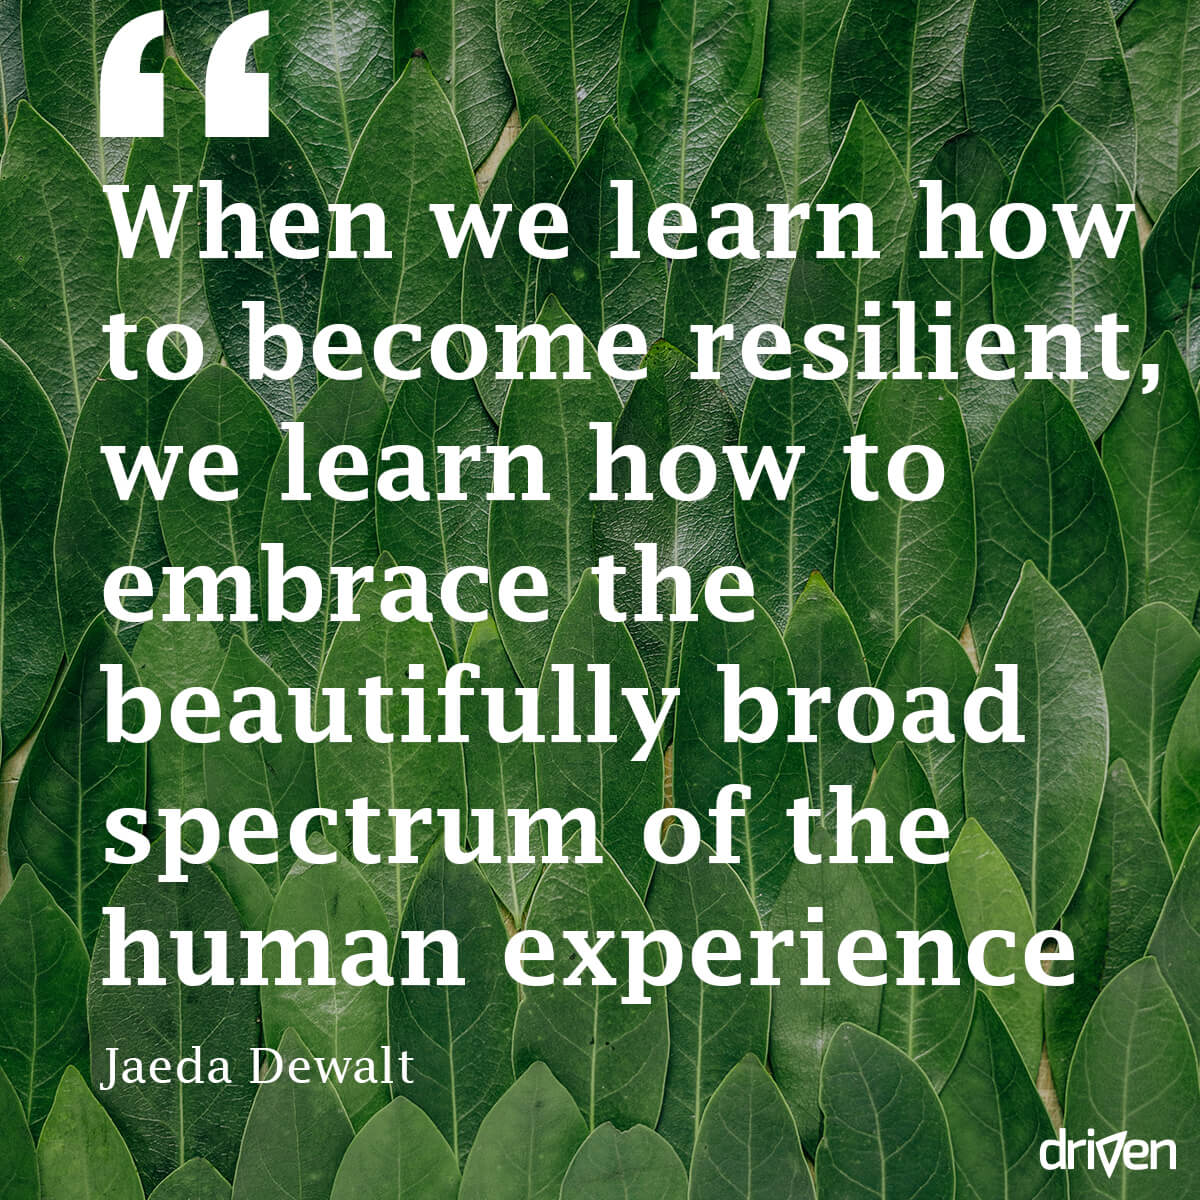 opretholde Doven Skal Girl about the Globe on Twitter: "Motivating Monday "When we learn how to  become resilient we learn to embrace the beautifully broad spectrum of the  human experience" - Jaeda Dewalt. Great quote